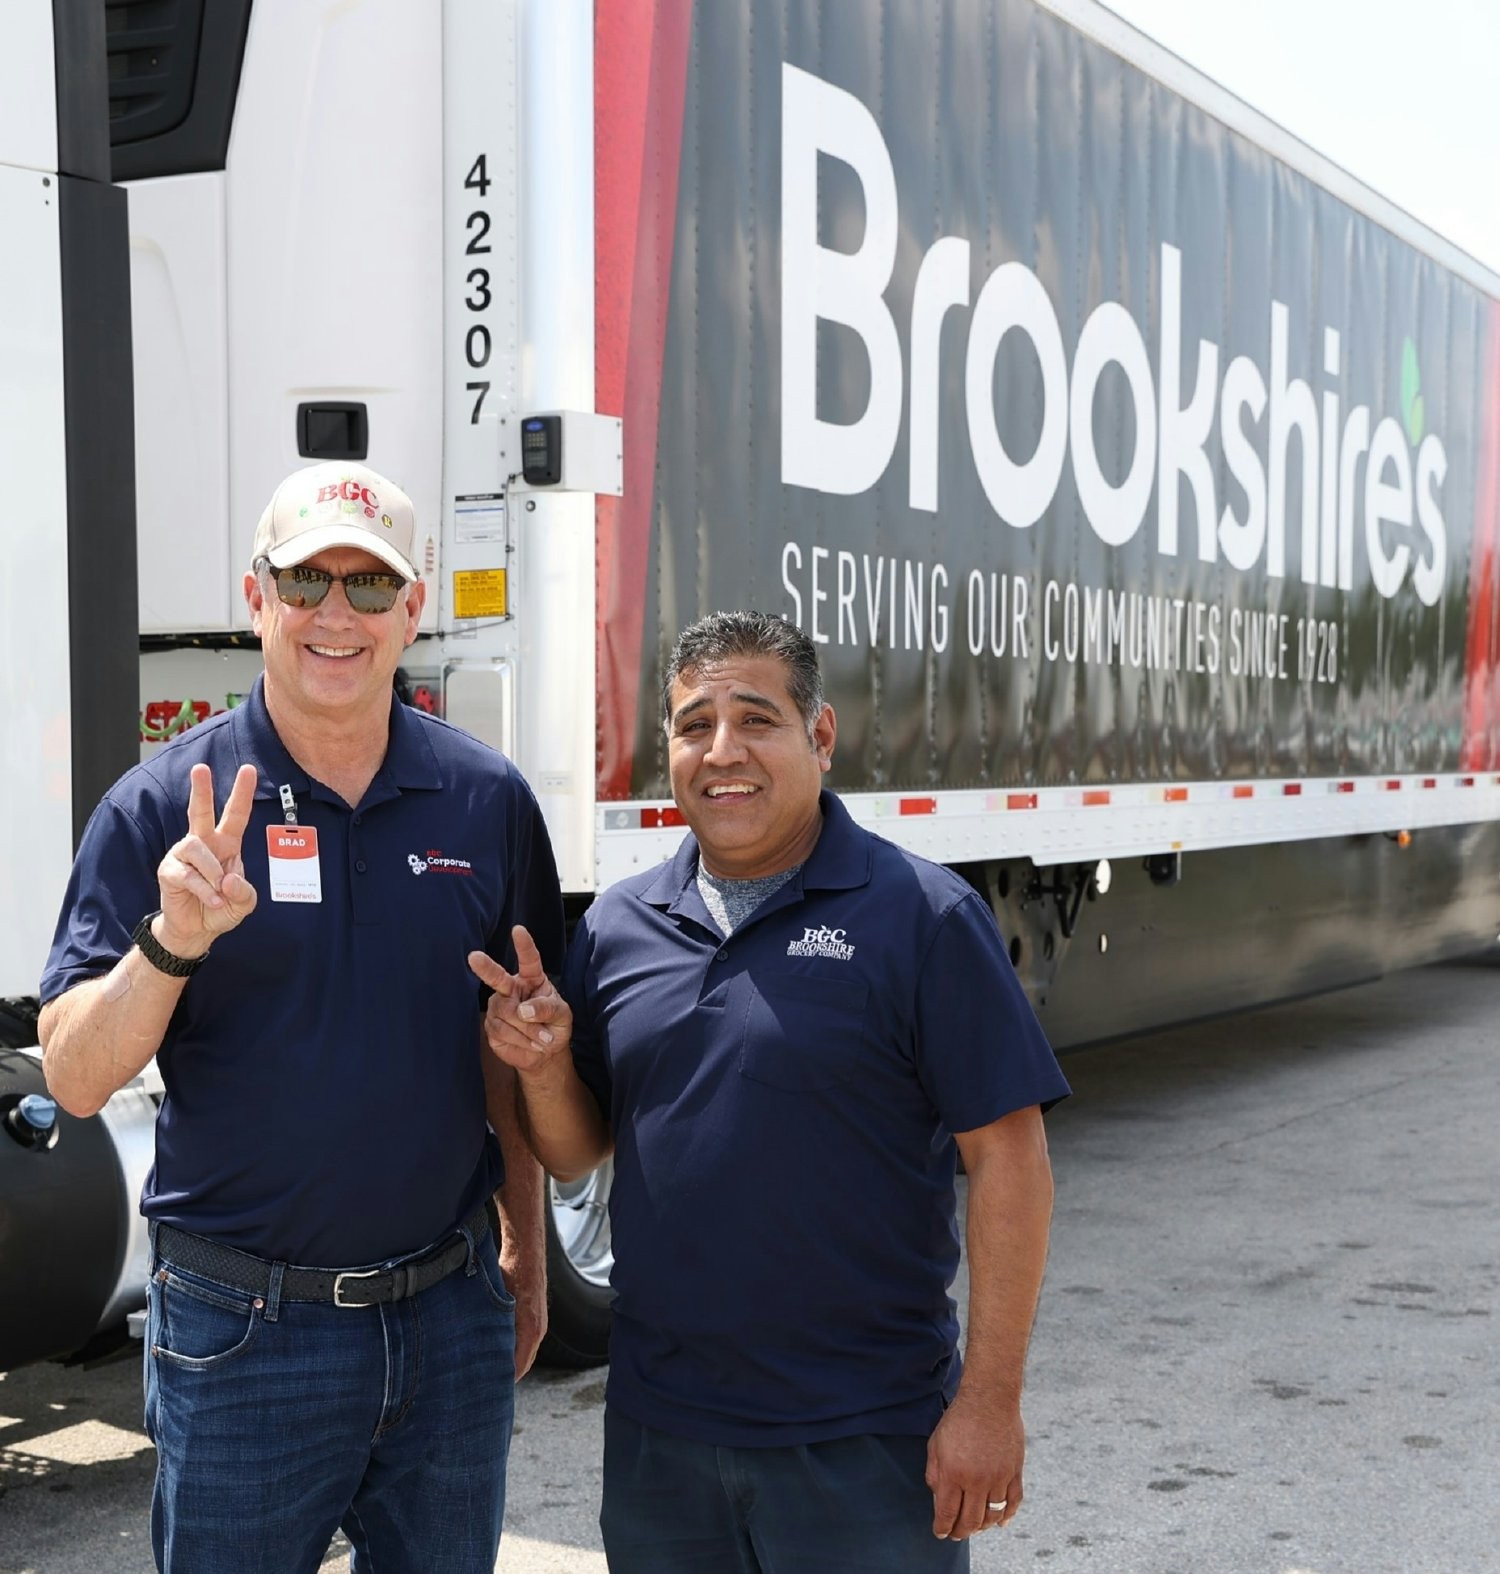 CHAIRMAN & CEO BRAD BROOKSHIRE (L) DRIVES GREAT WORKPLACE CULTURE - HERE WITH A TRUCK DRIVER HONORED FOR 2M SAFE MILES
